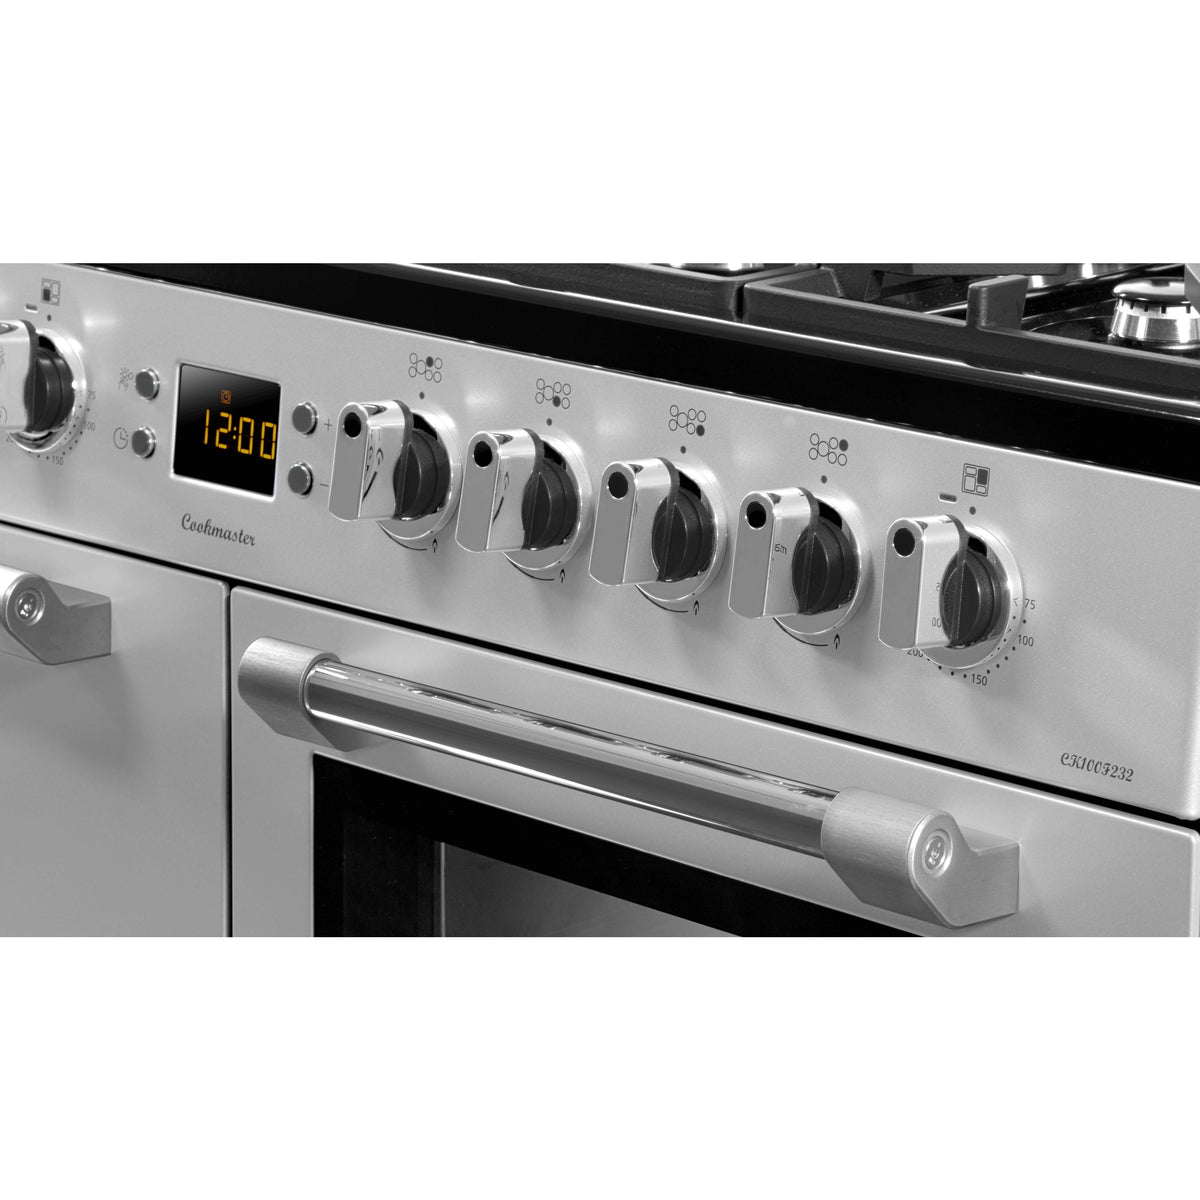 Leisure Cookmaster 100CM Dual Fuel Range Cooker - Silver | CK100F232S (7666673451196)